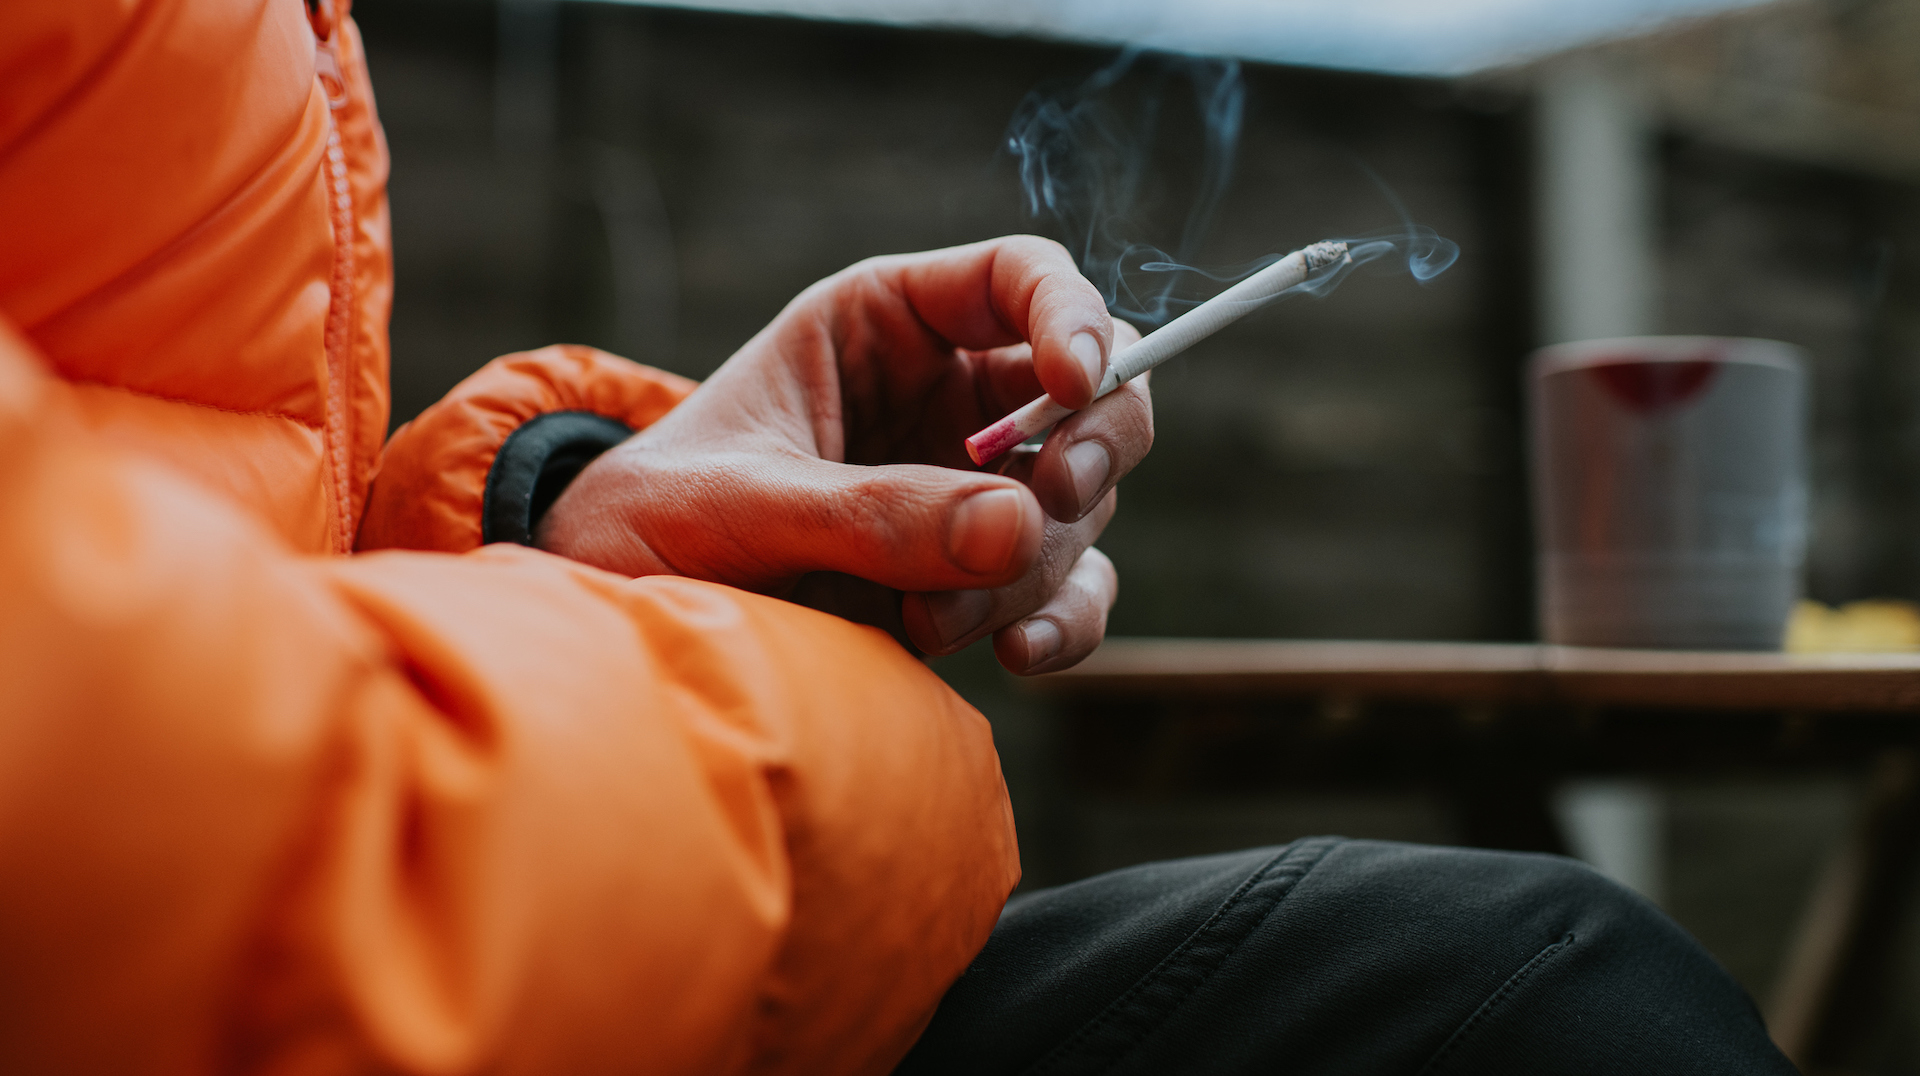 A photograph of a person in a puffy jacket smoking a cigarette.